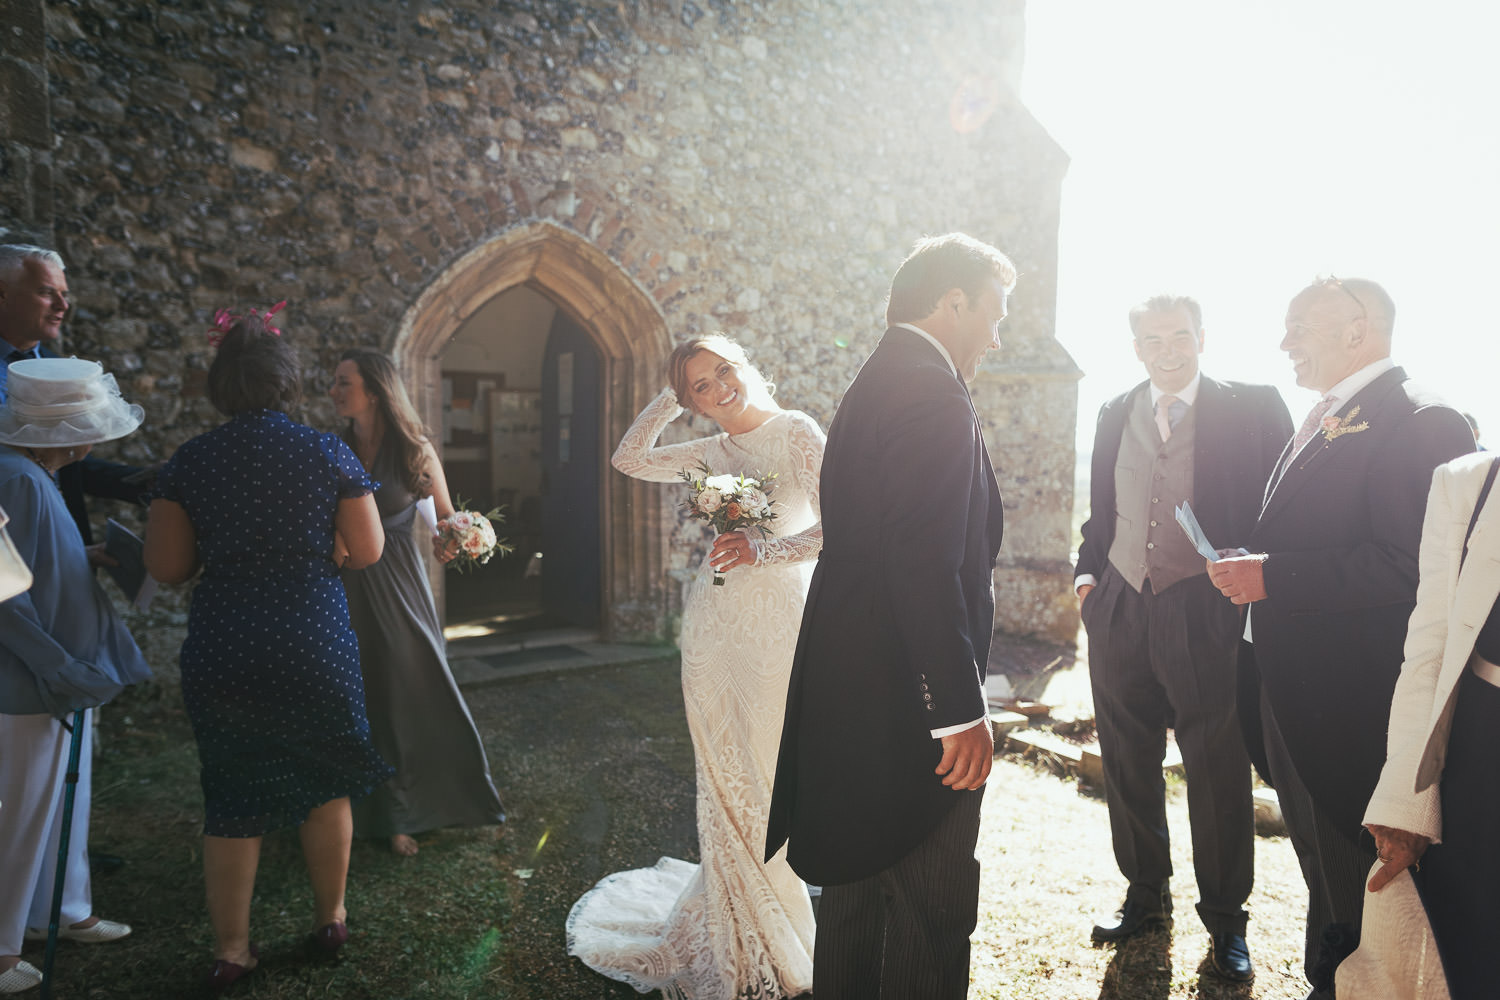 Wedding guests are chatting to each other but the bride is looking at the camera, illuminated by the sunlight. The door of The Church of St Mary & St Margaret in Stow Maries is behind her. She is wearing a long lace wedding dress with long sleeves.